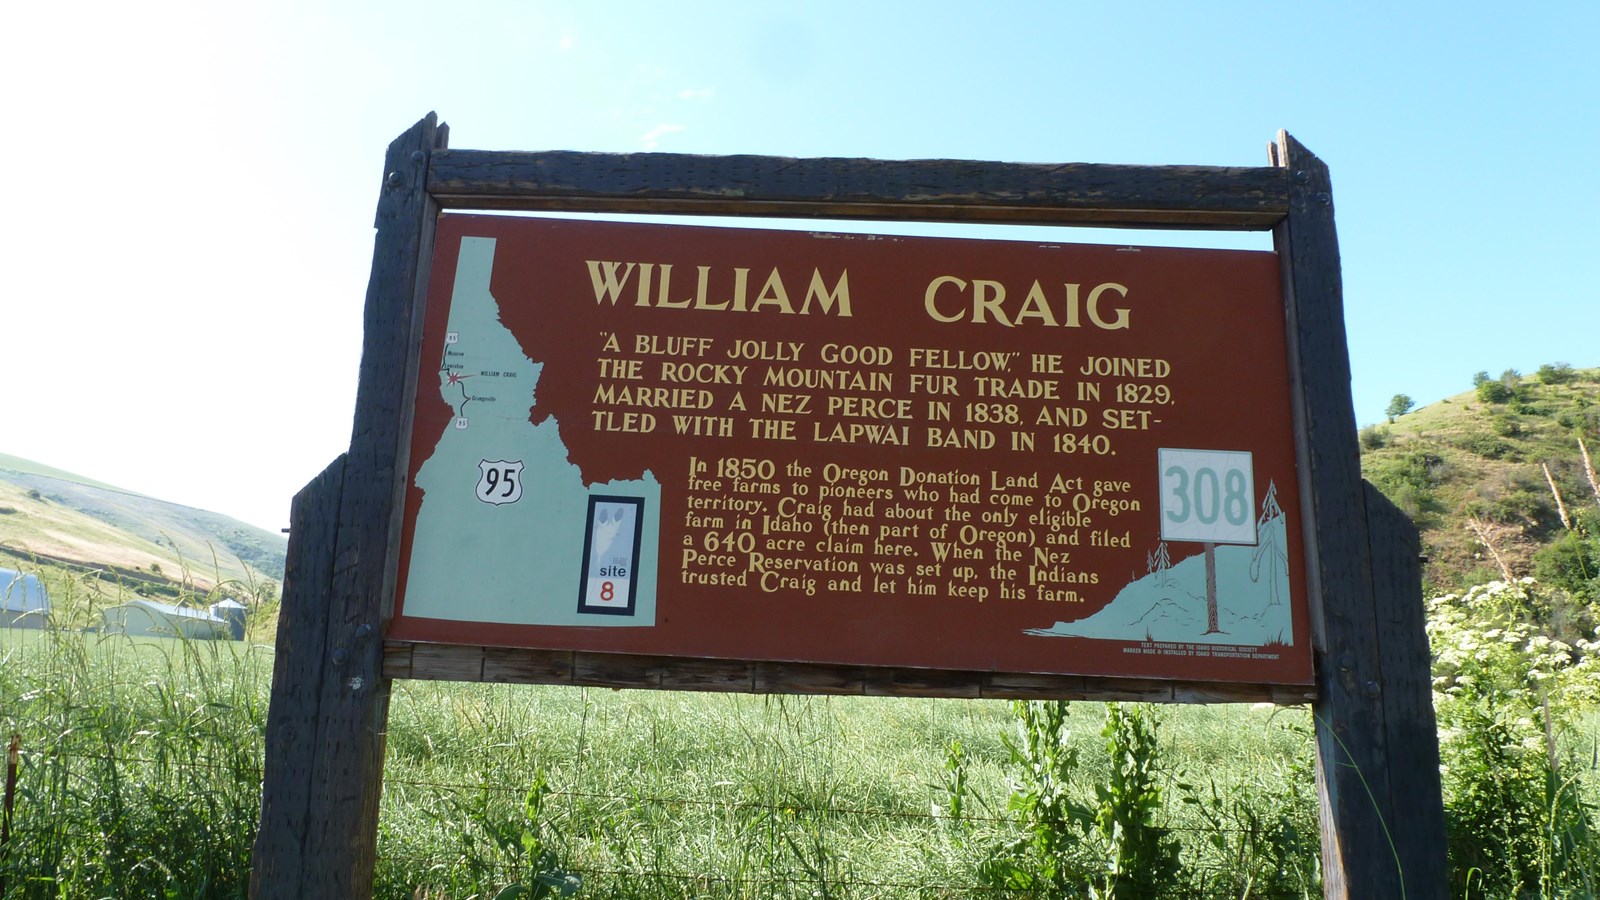 A historical marker sign with wooden beams and written text about William Craig